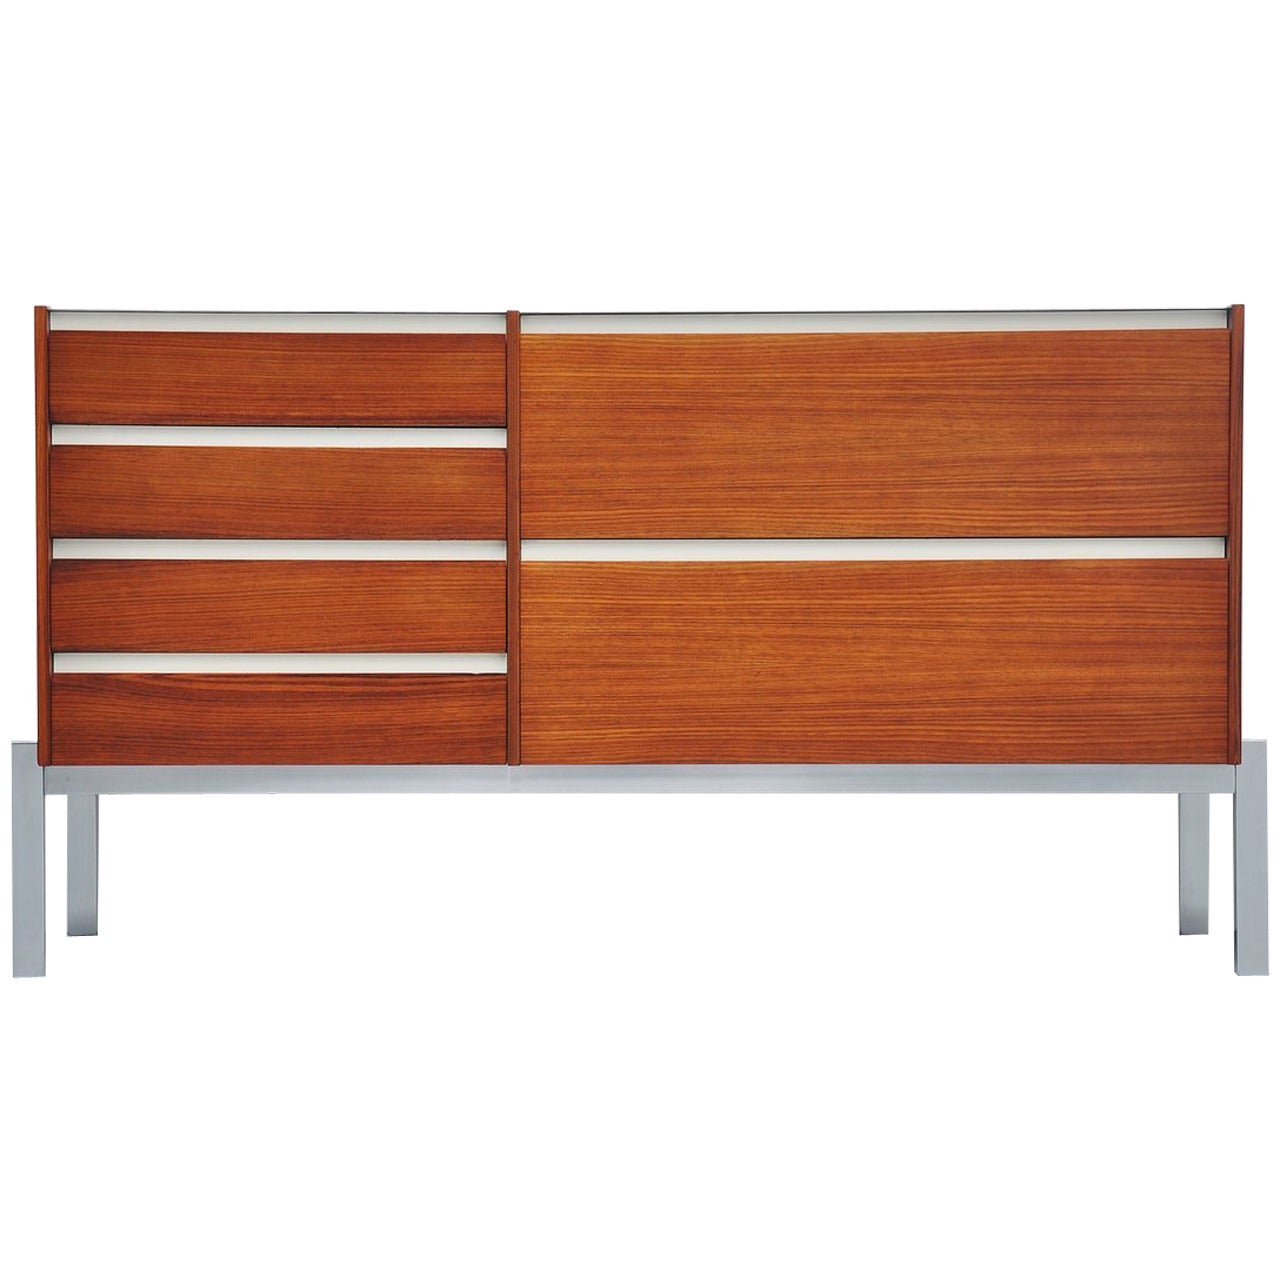 Kho Liang Ie and Wim Crouwel Credenza for Fristho, 1957